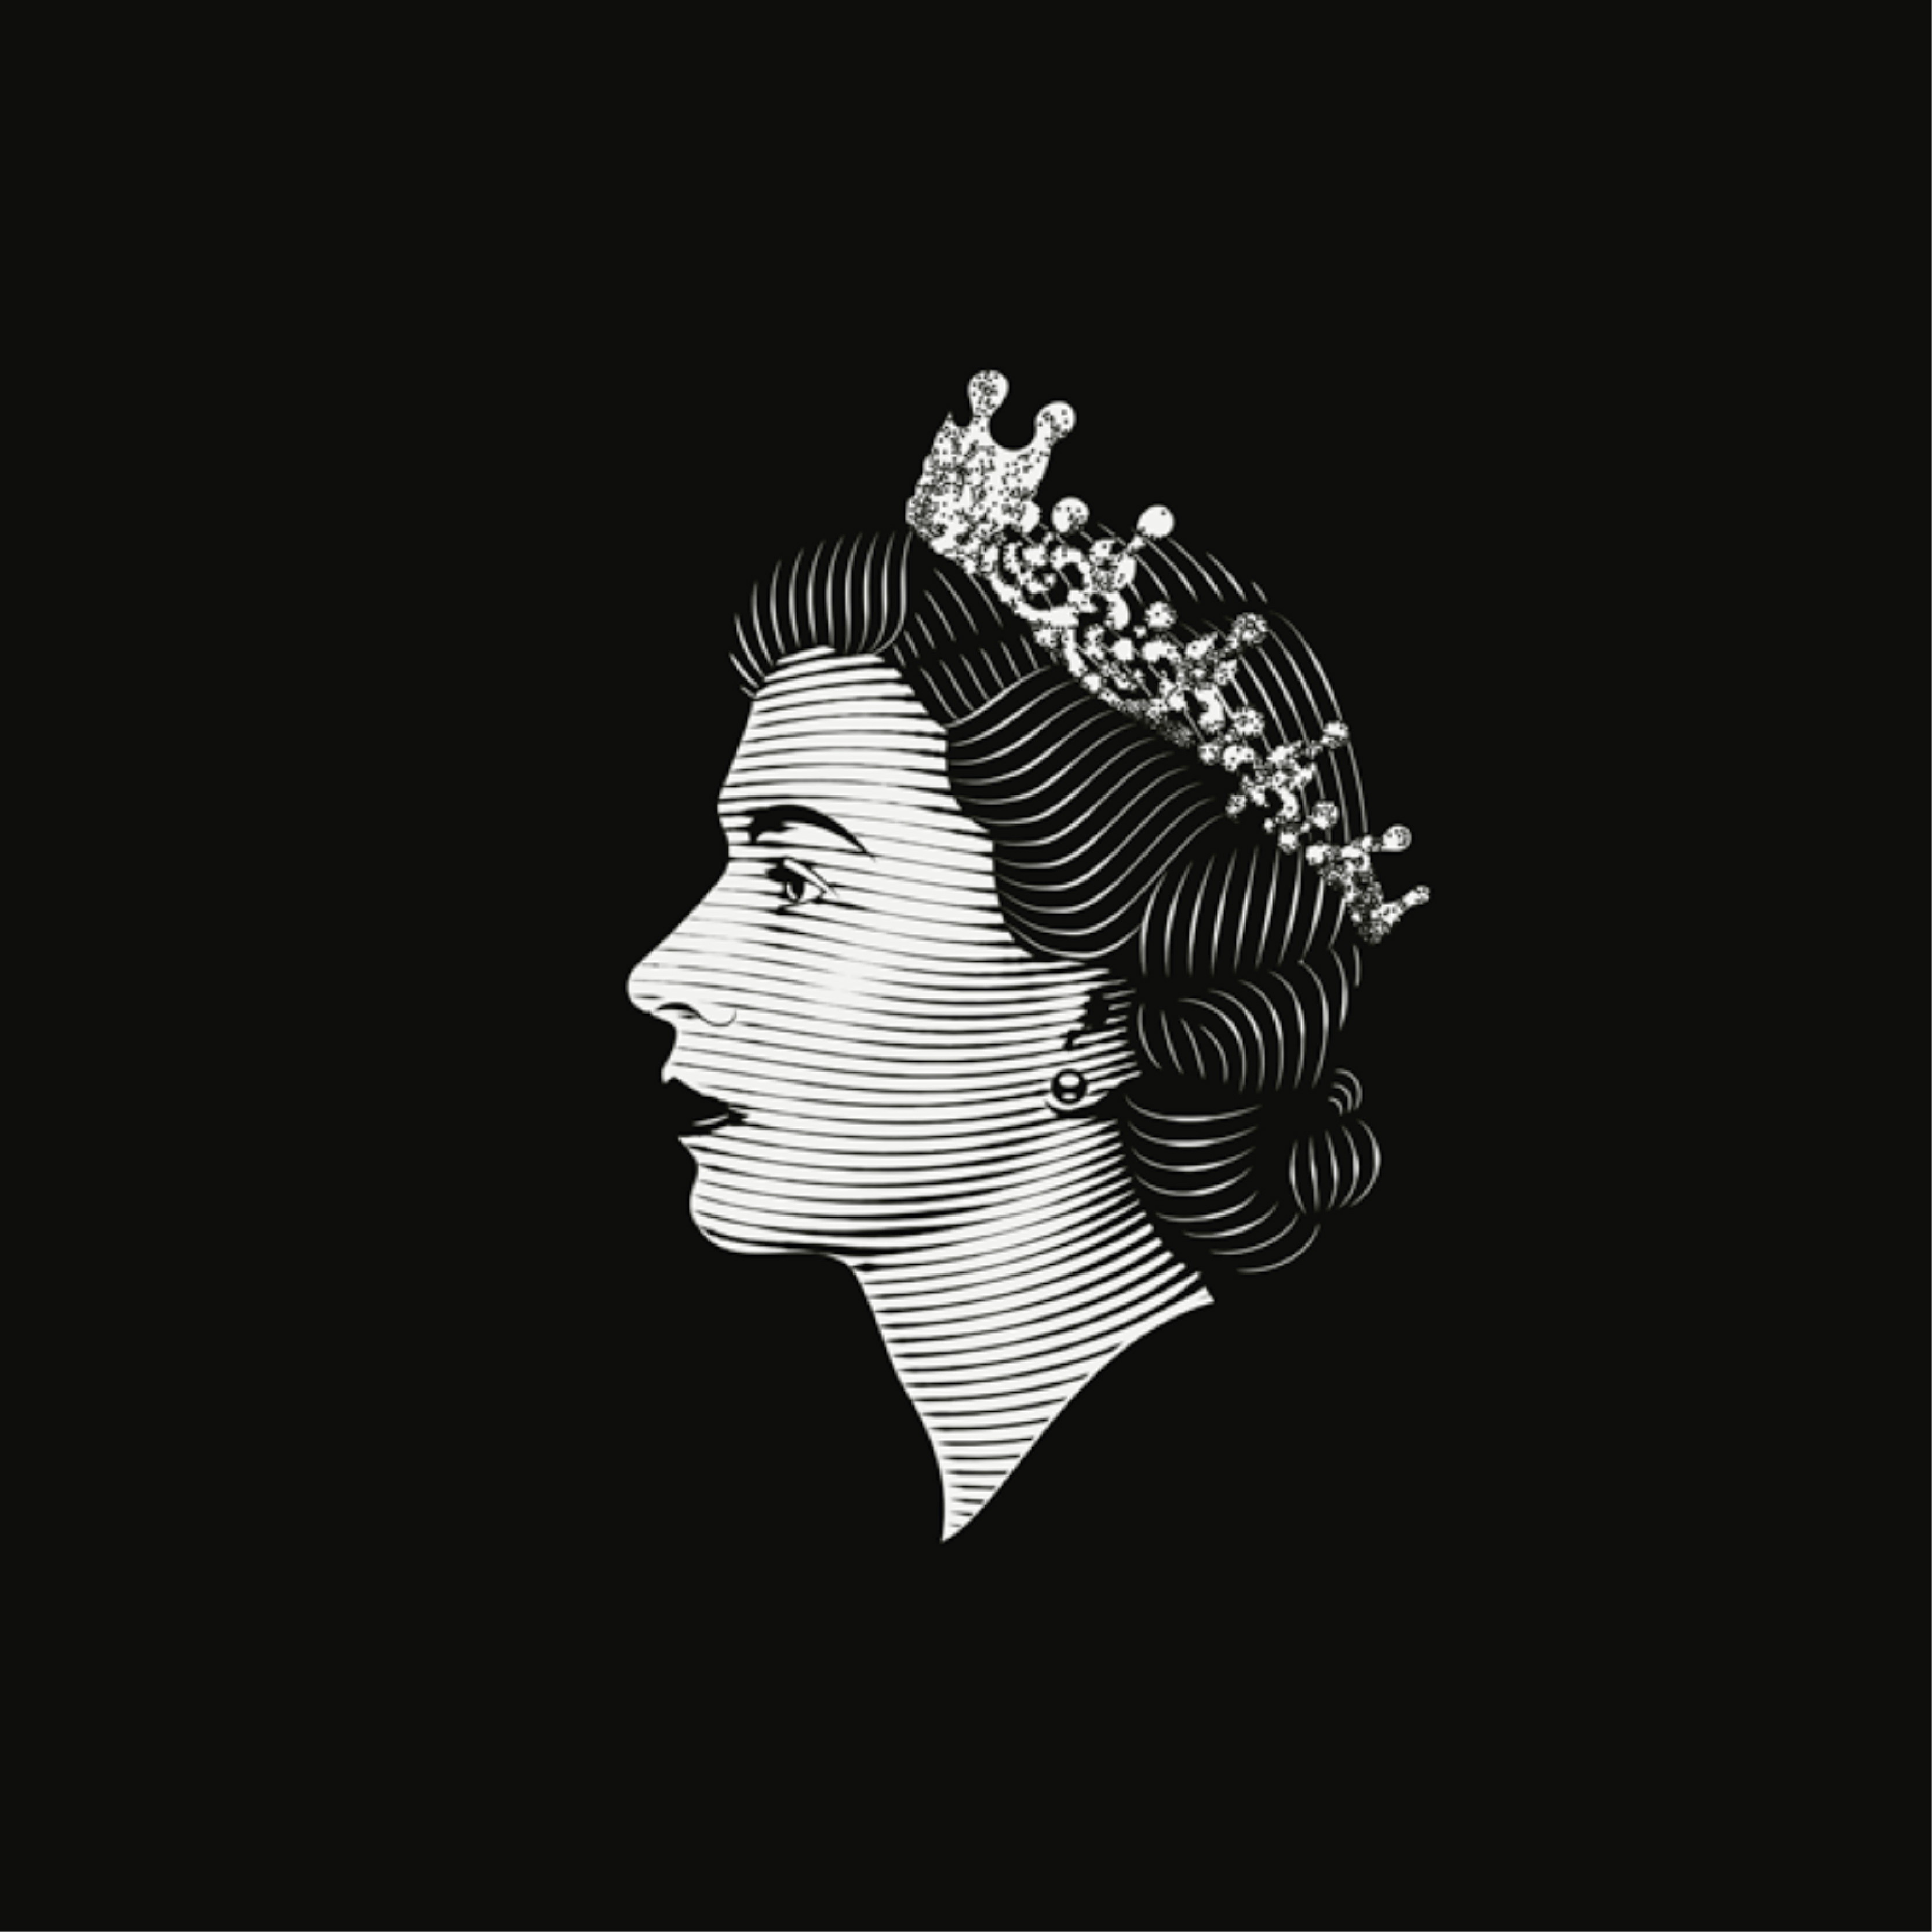 How to create Queen Elizabeth portrait in engraved style with WidthScribe